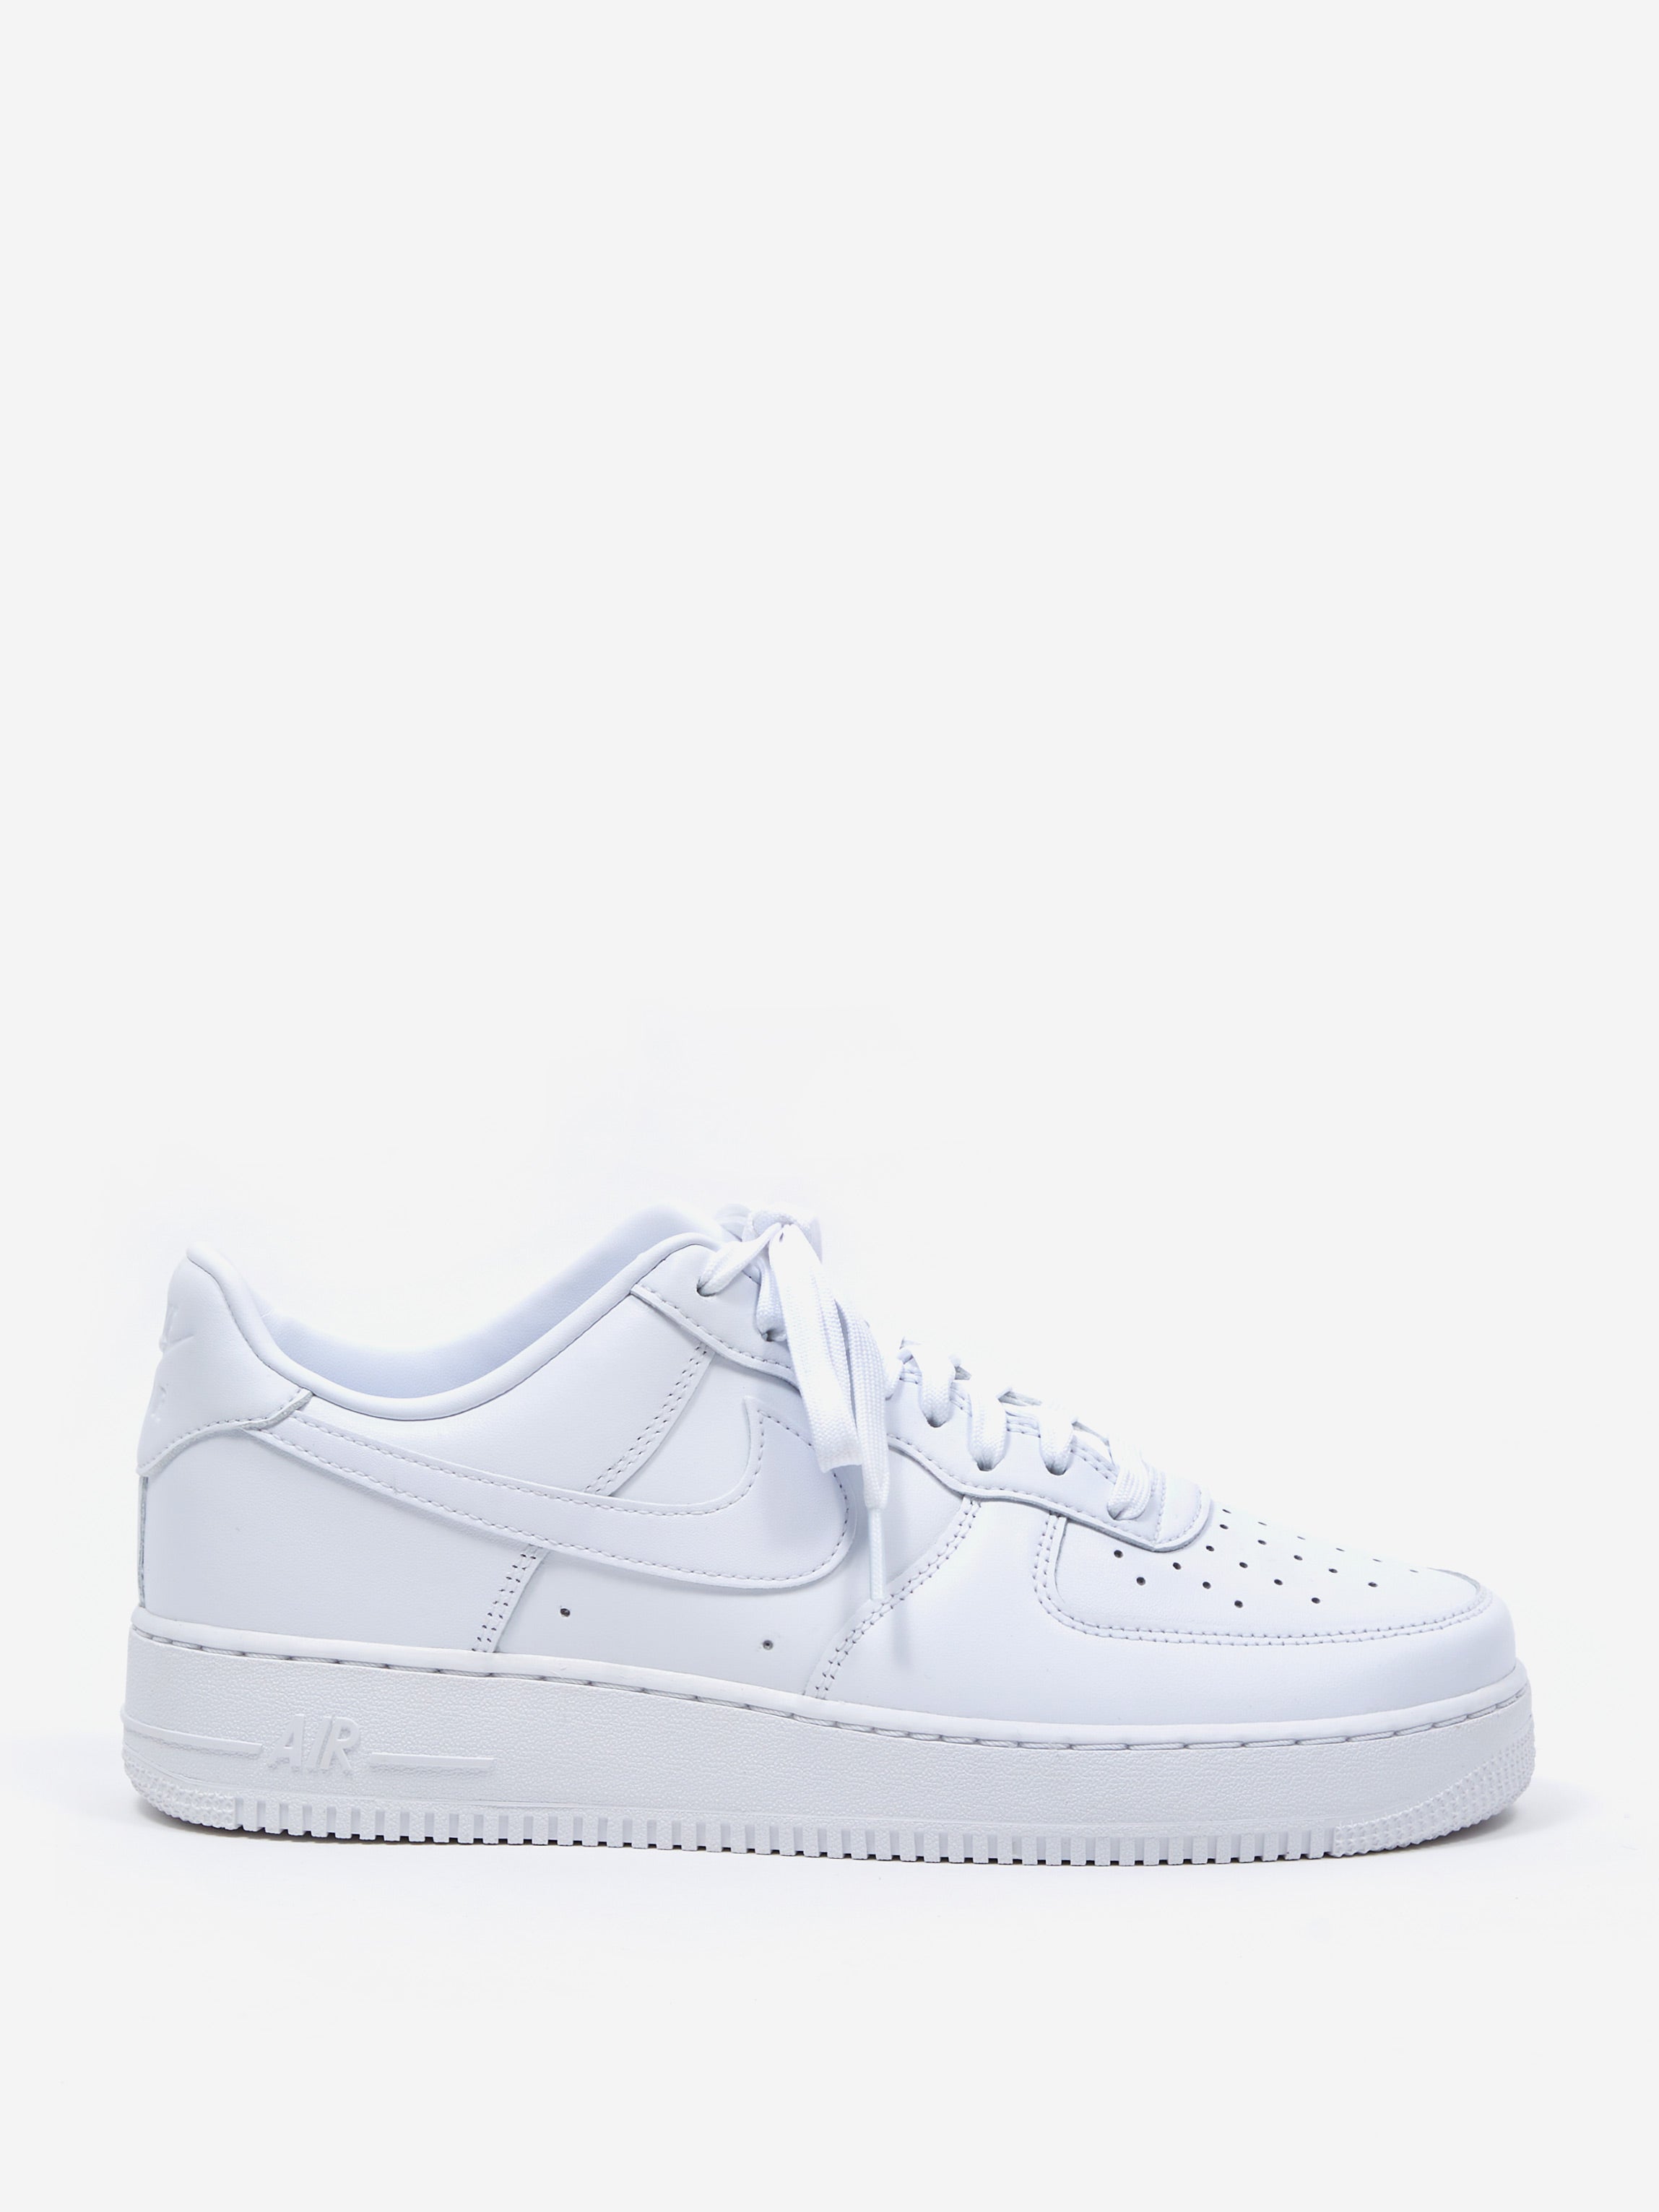 Size+10.5+-+Nike+Air+Force+1+%2707+Pine+Green for sale online